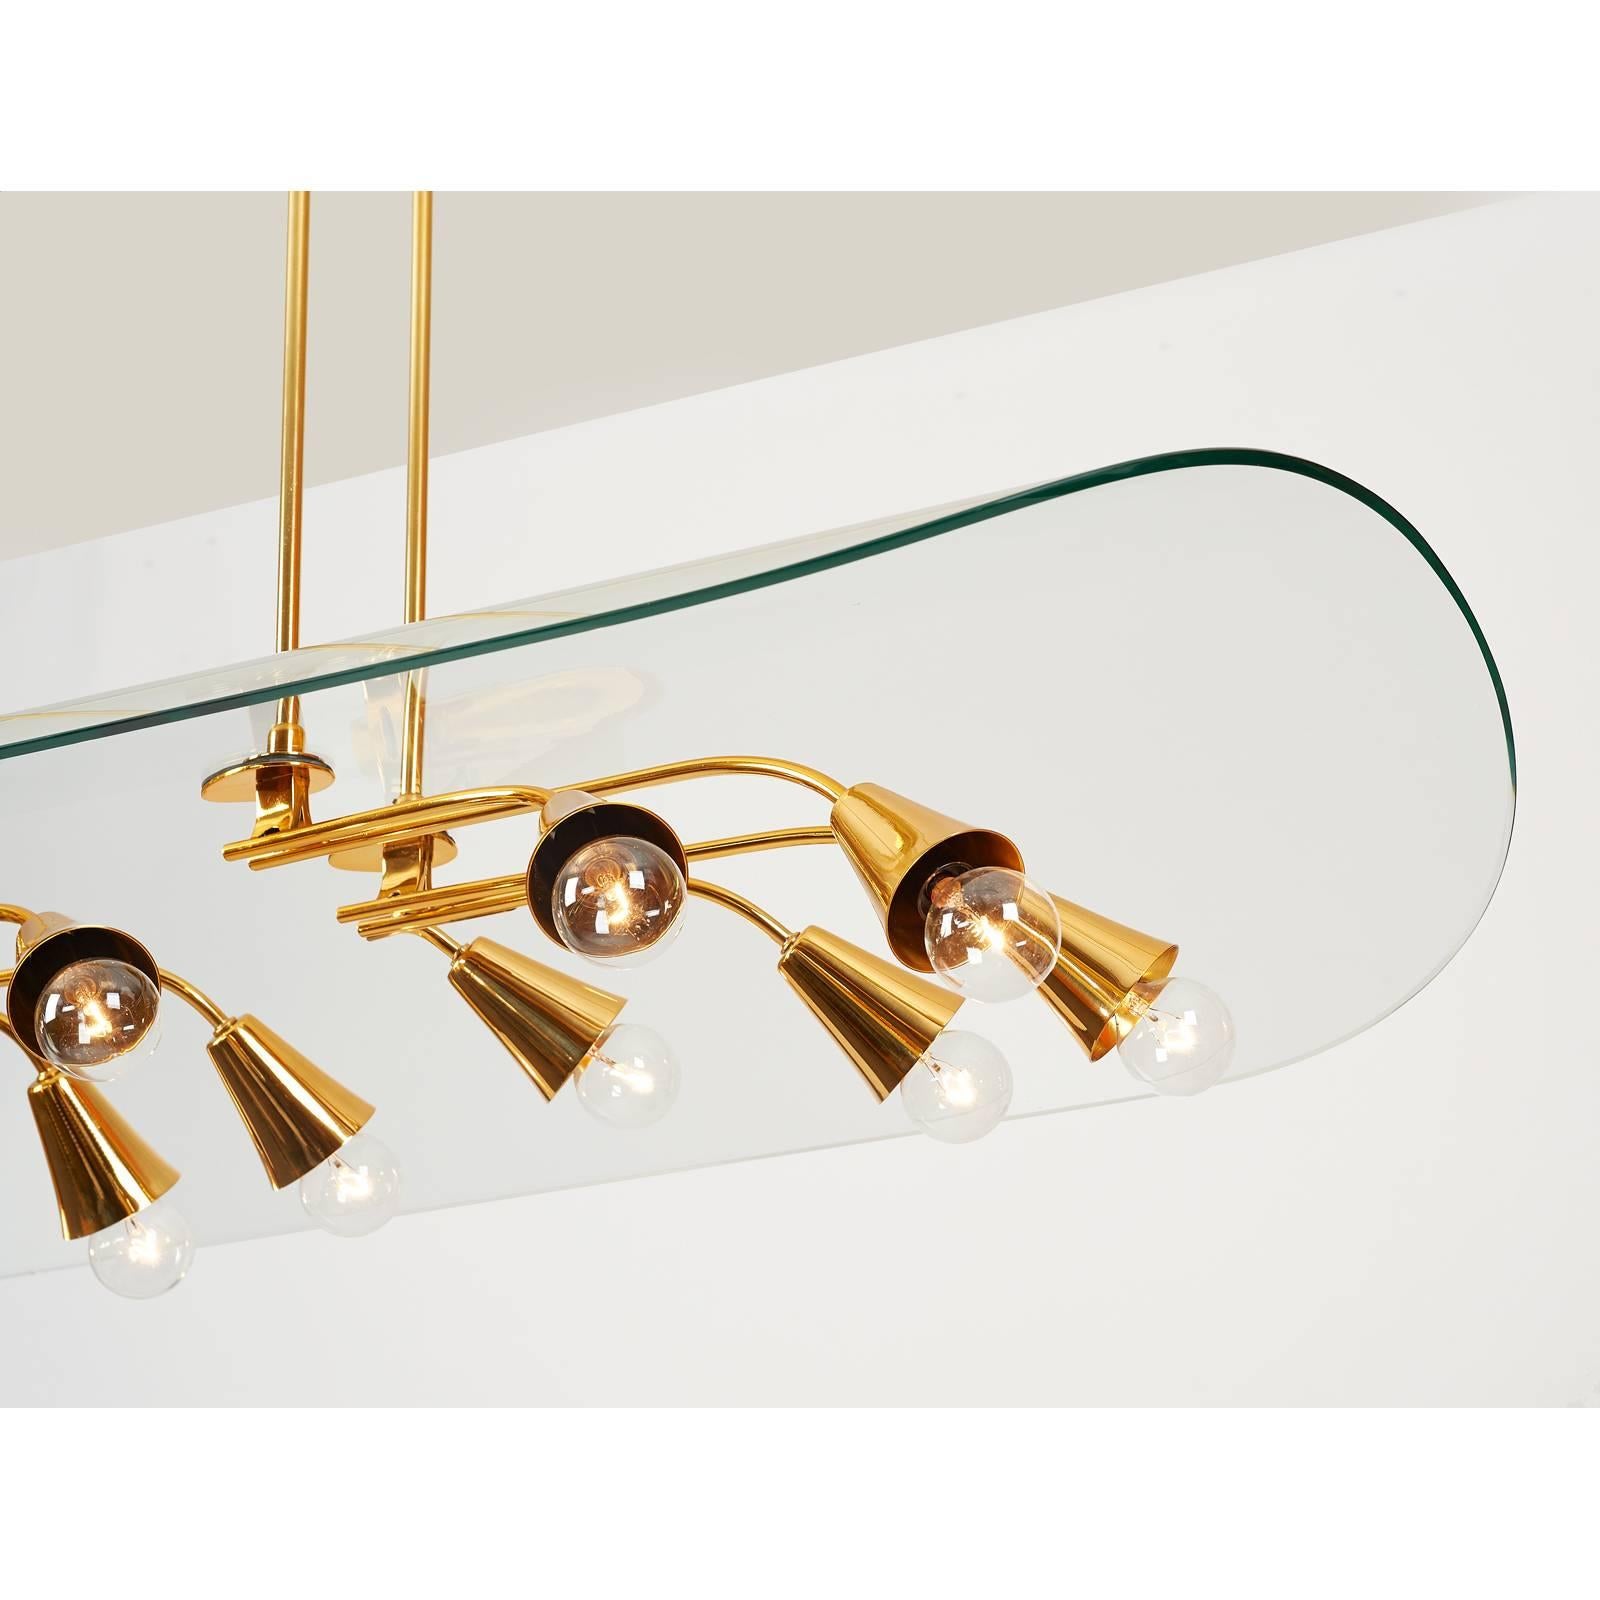 Pietro Chiesa (1892-1948) for Fontana Arte
A rare and extraordinary large twenty-branch polished brass chandelier
sheltered under a magnificent canopy of curved molded glass 
Italy, circa 1950. Stamped with maker's mark.
Dimensions: 65 x 24 x 47